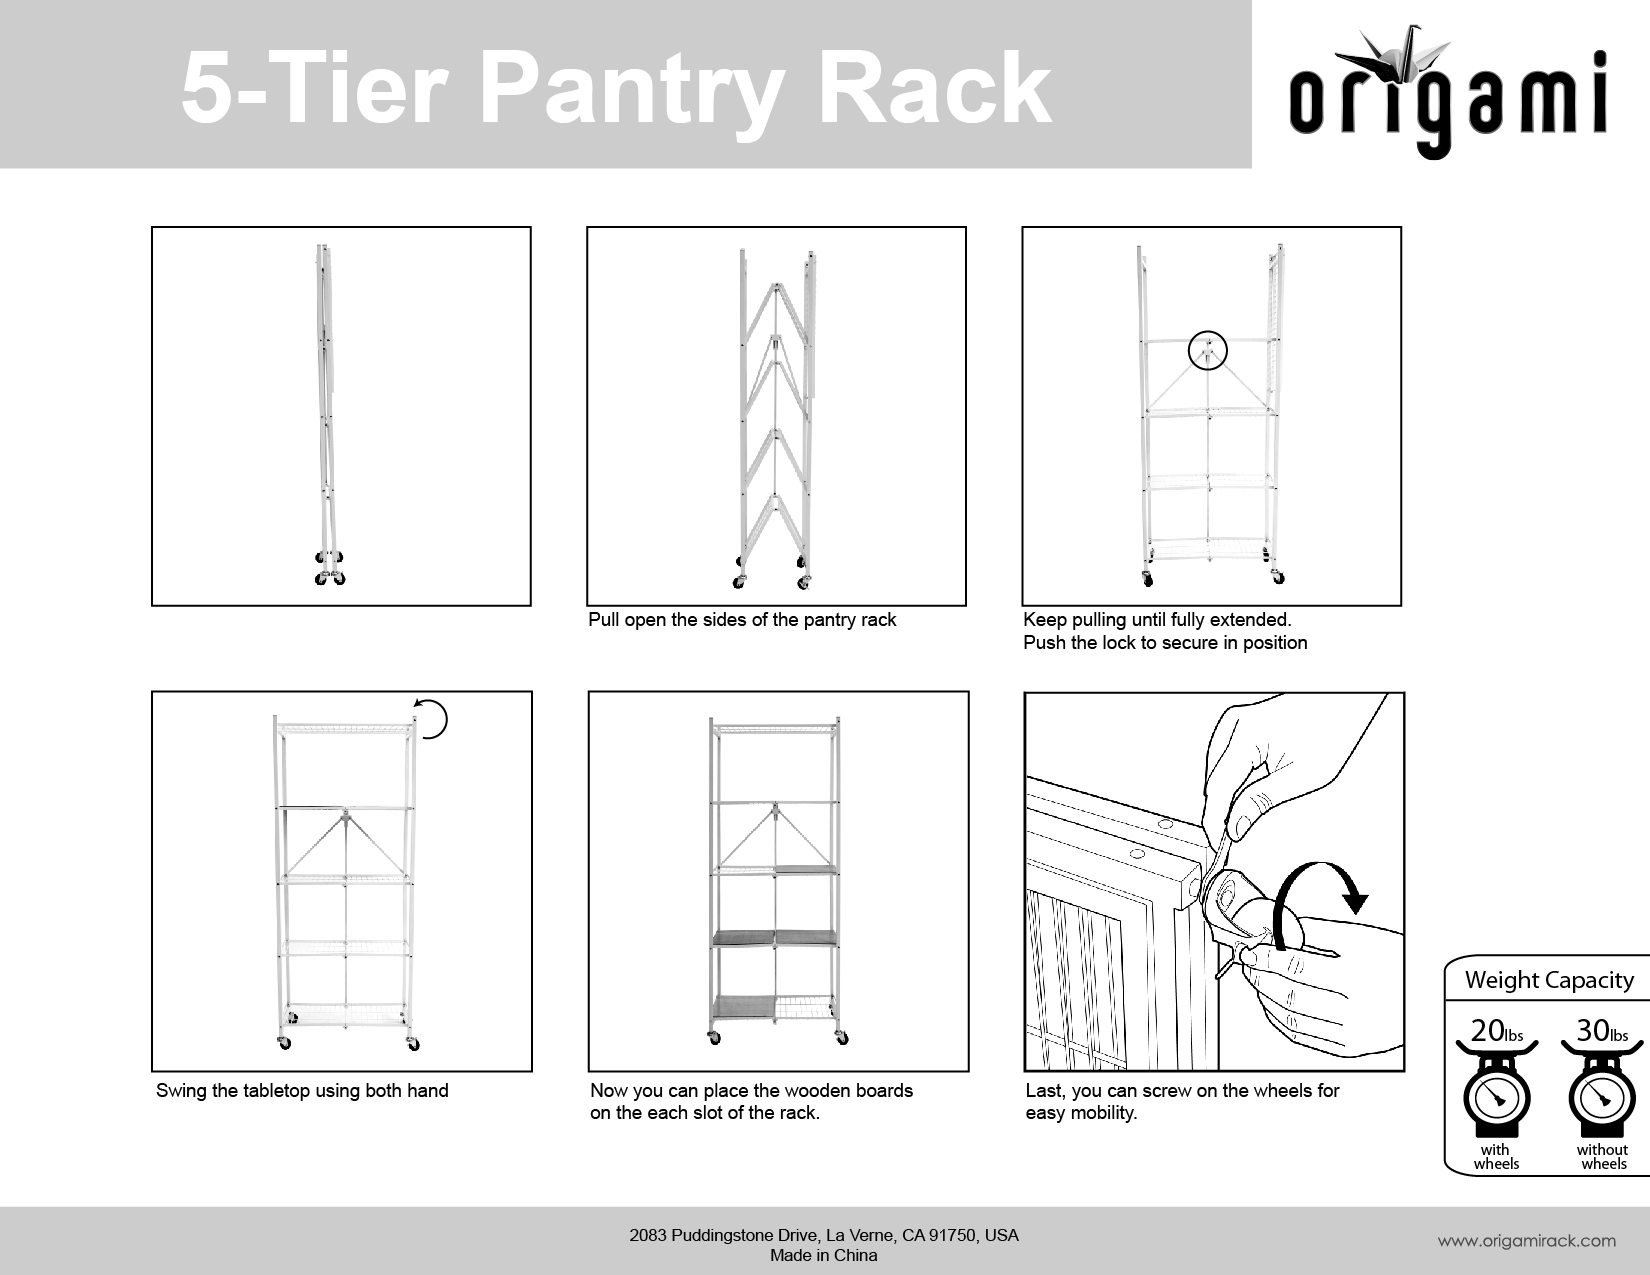 Origami Folding Rack Origami 2 Pack Of 5 Tier Pantry Racks With Wooden Shelves